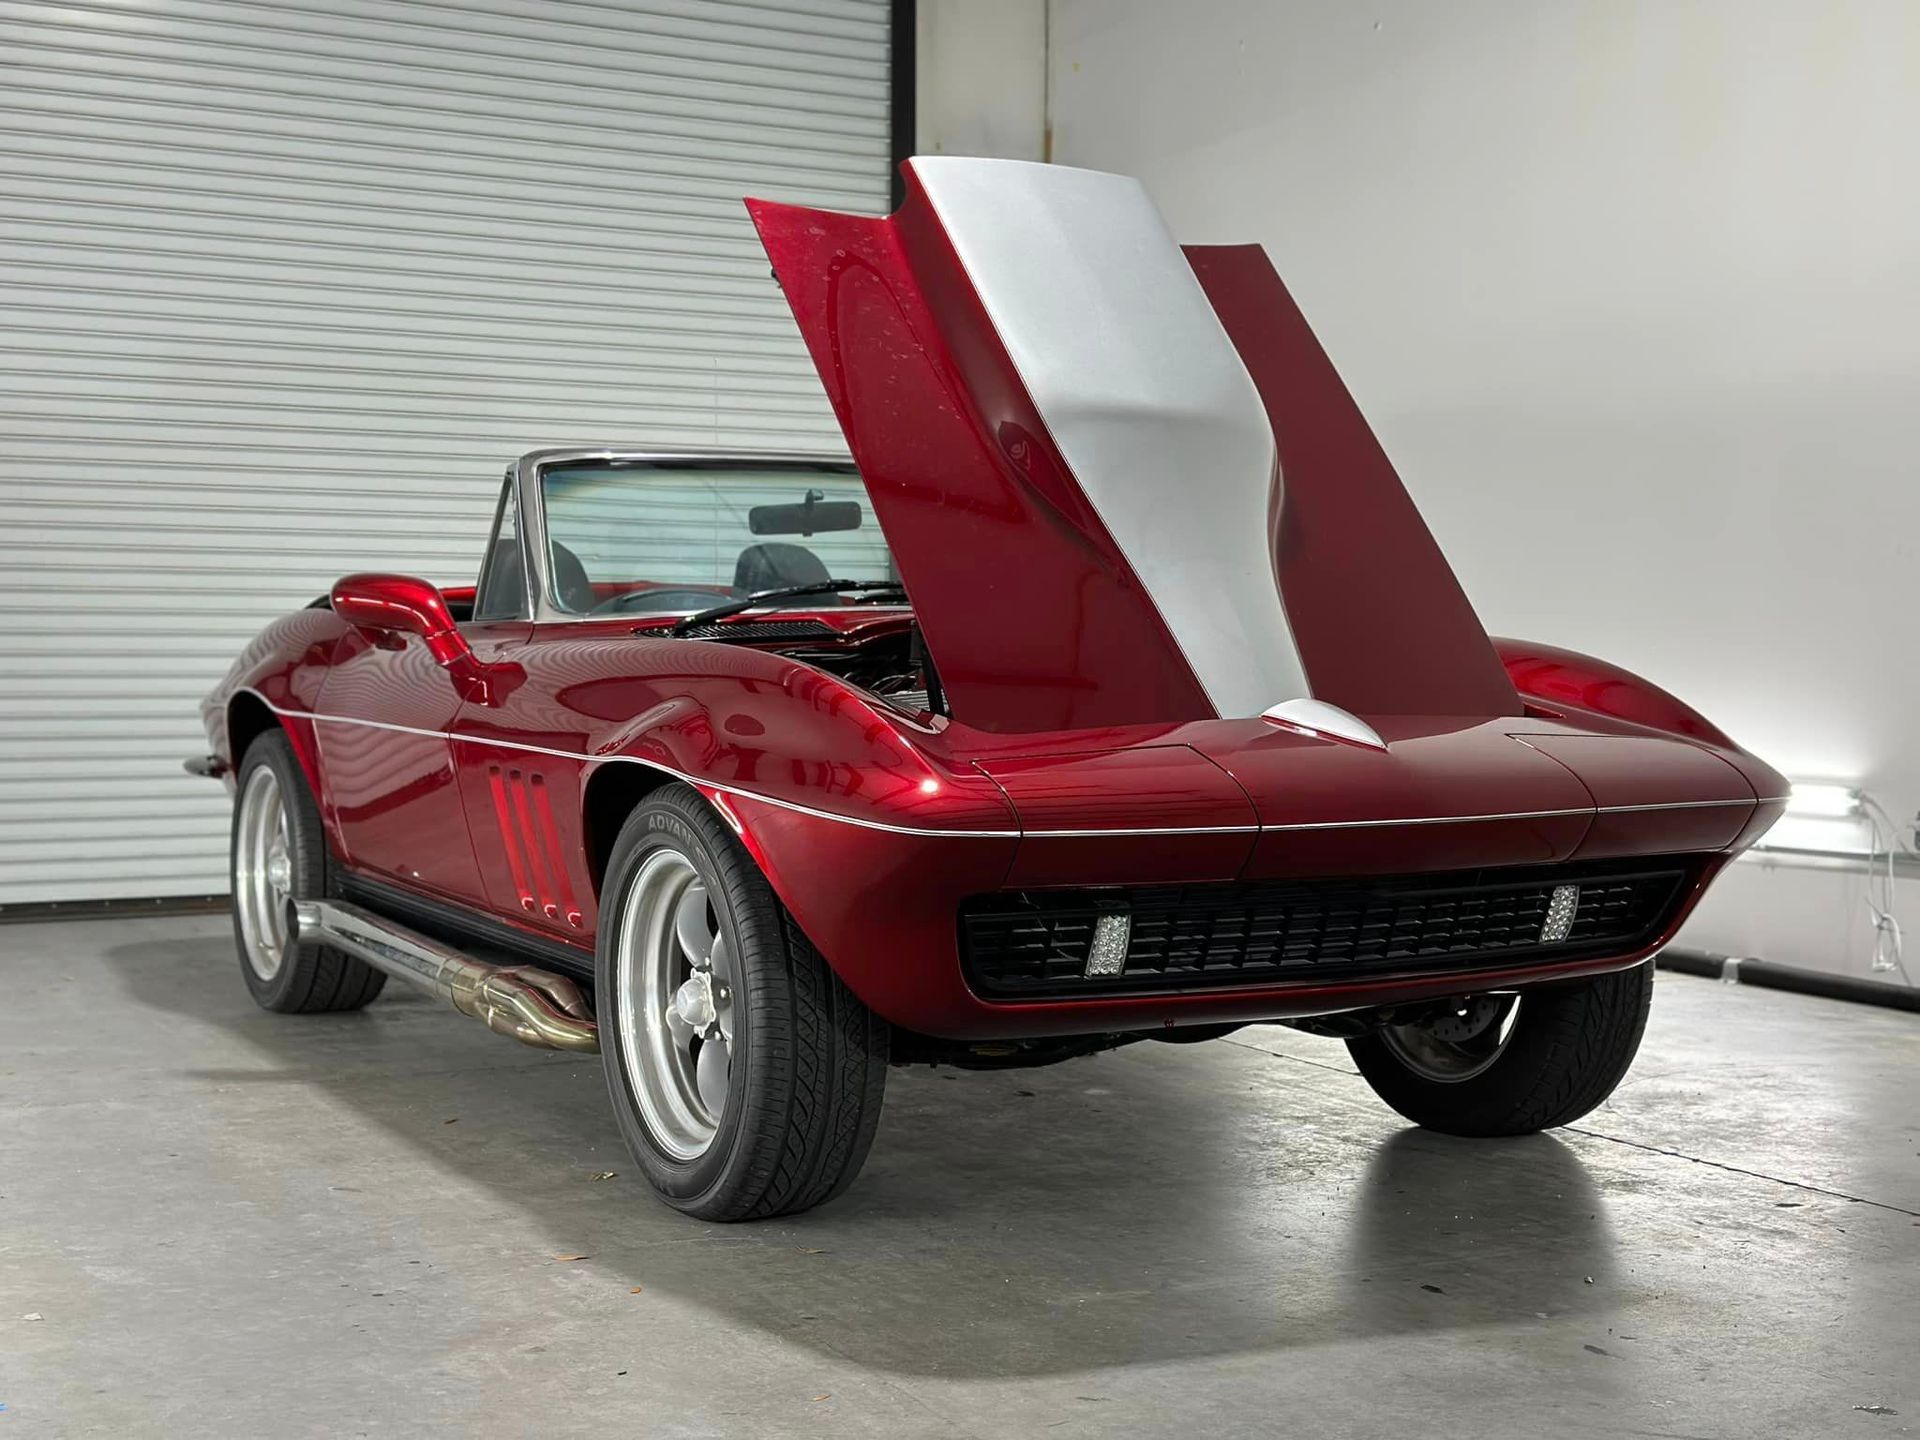 We're thrilled about our latest restoration project – a '66 Corvette Stingray restomod that's been i